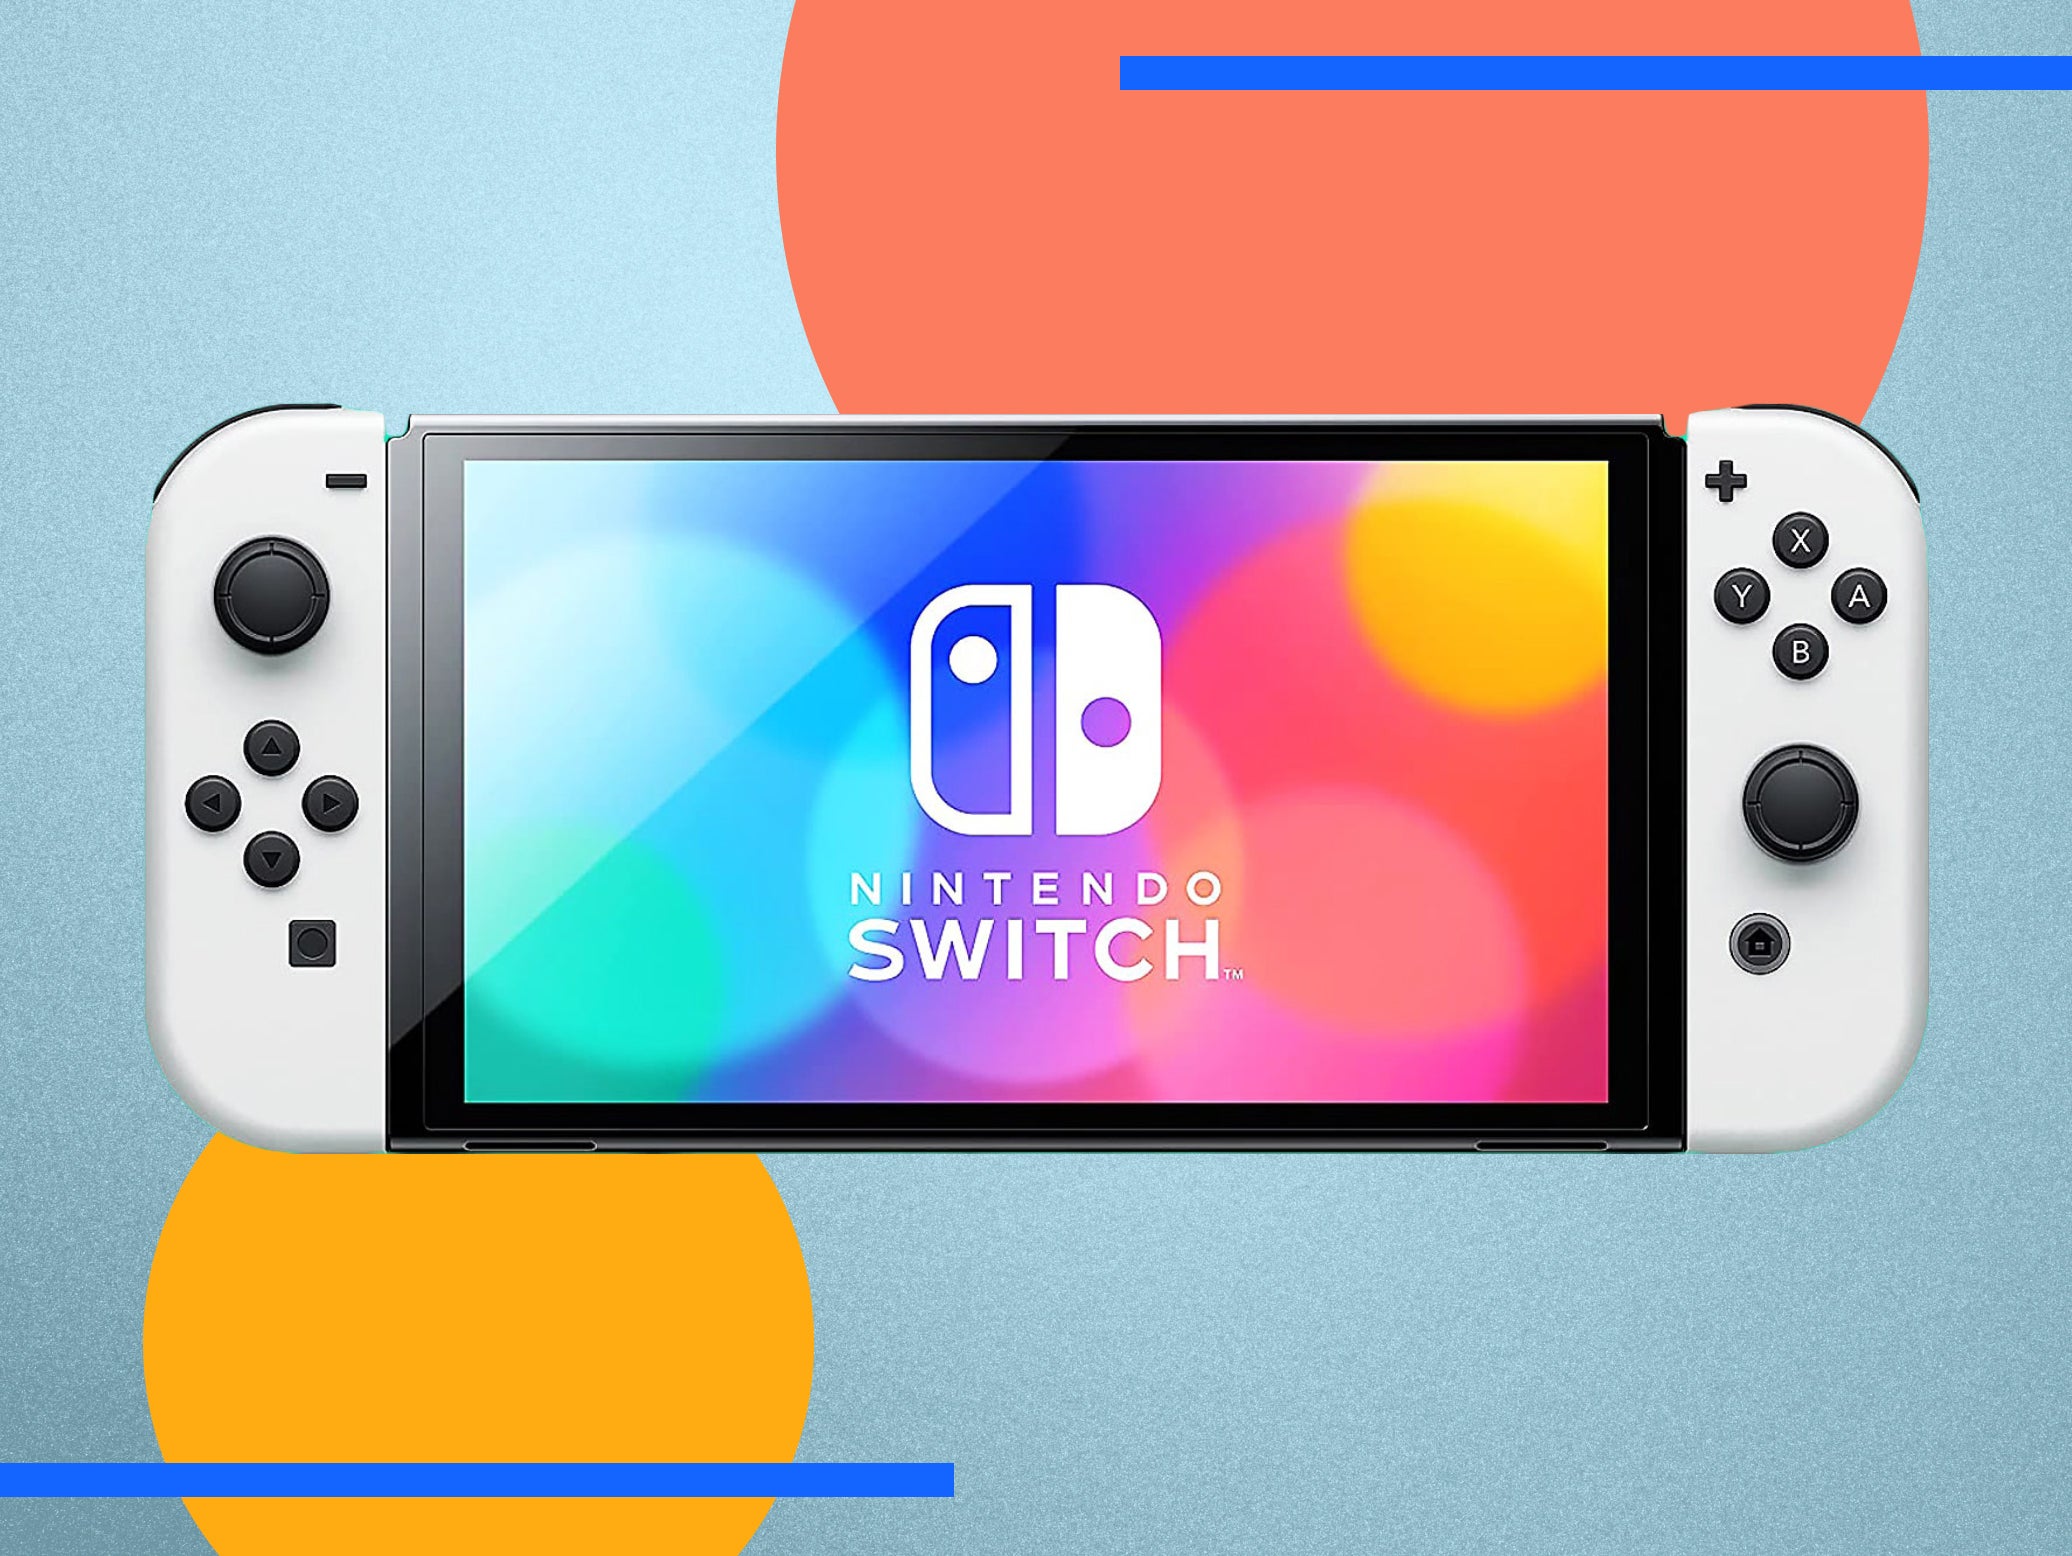 Nintendo Switch games 2022 The biggest new releases coming